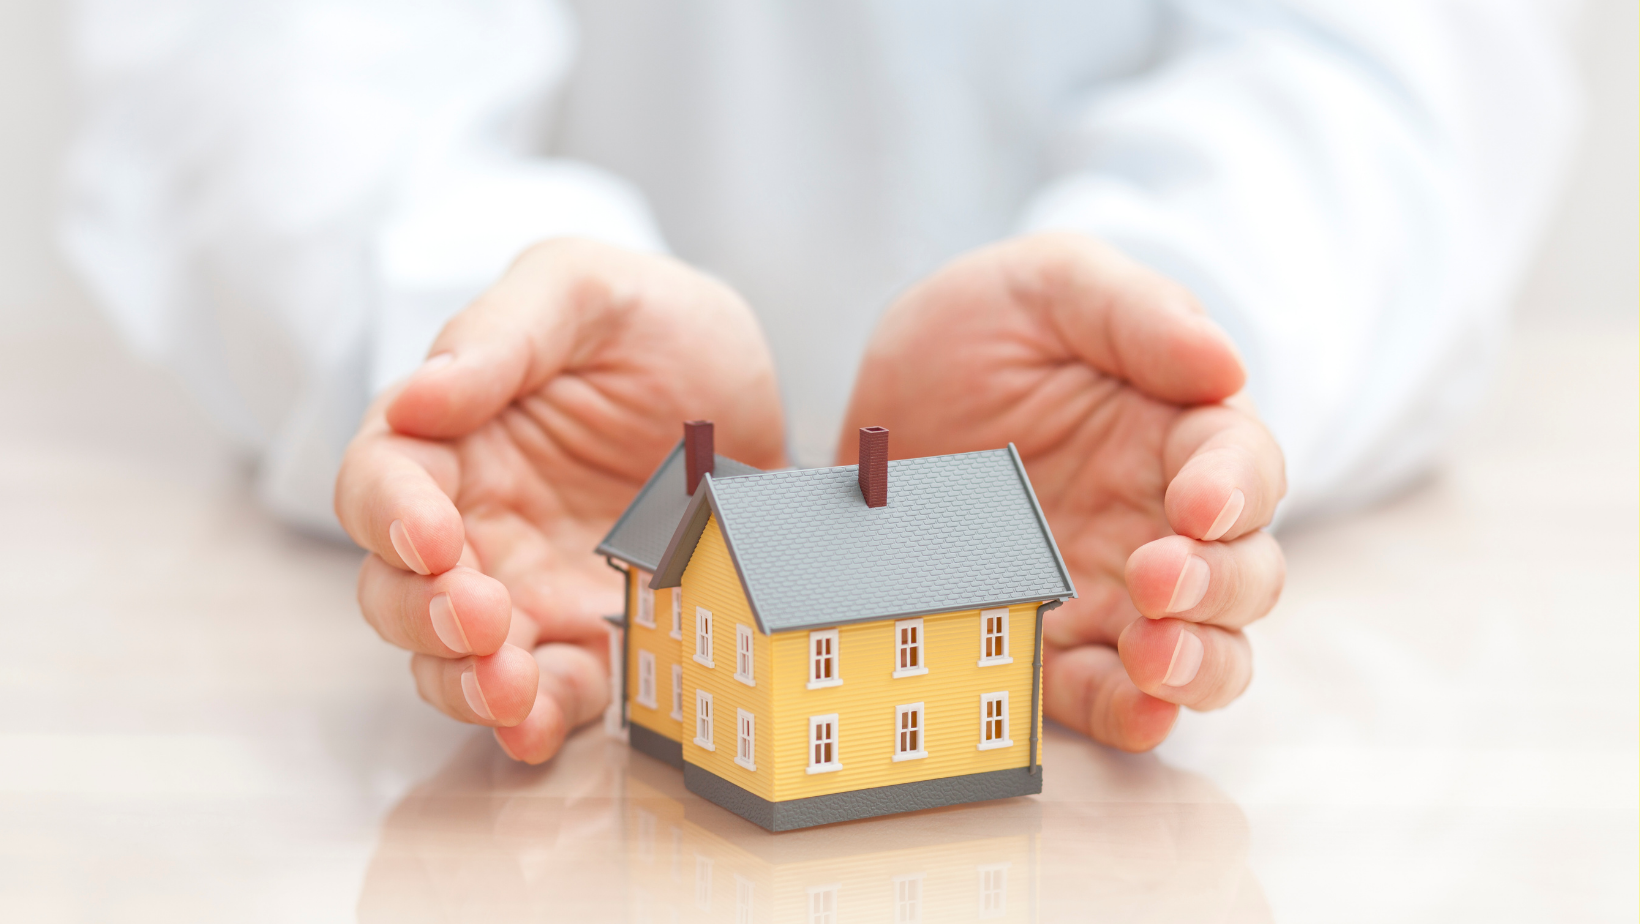 Safeguard your mortgage and family's future with insurance options.